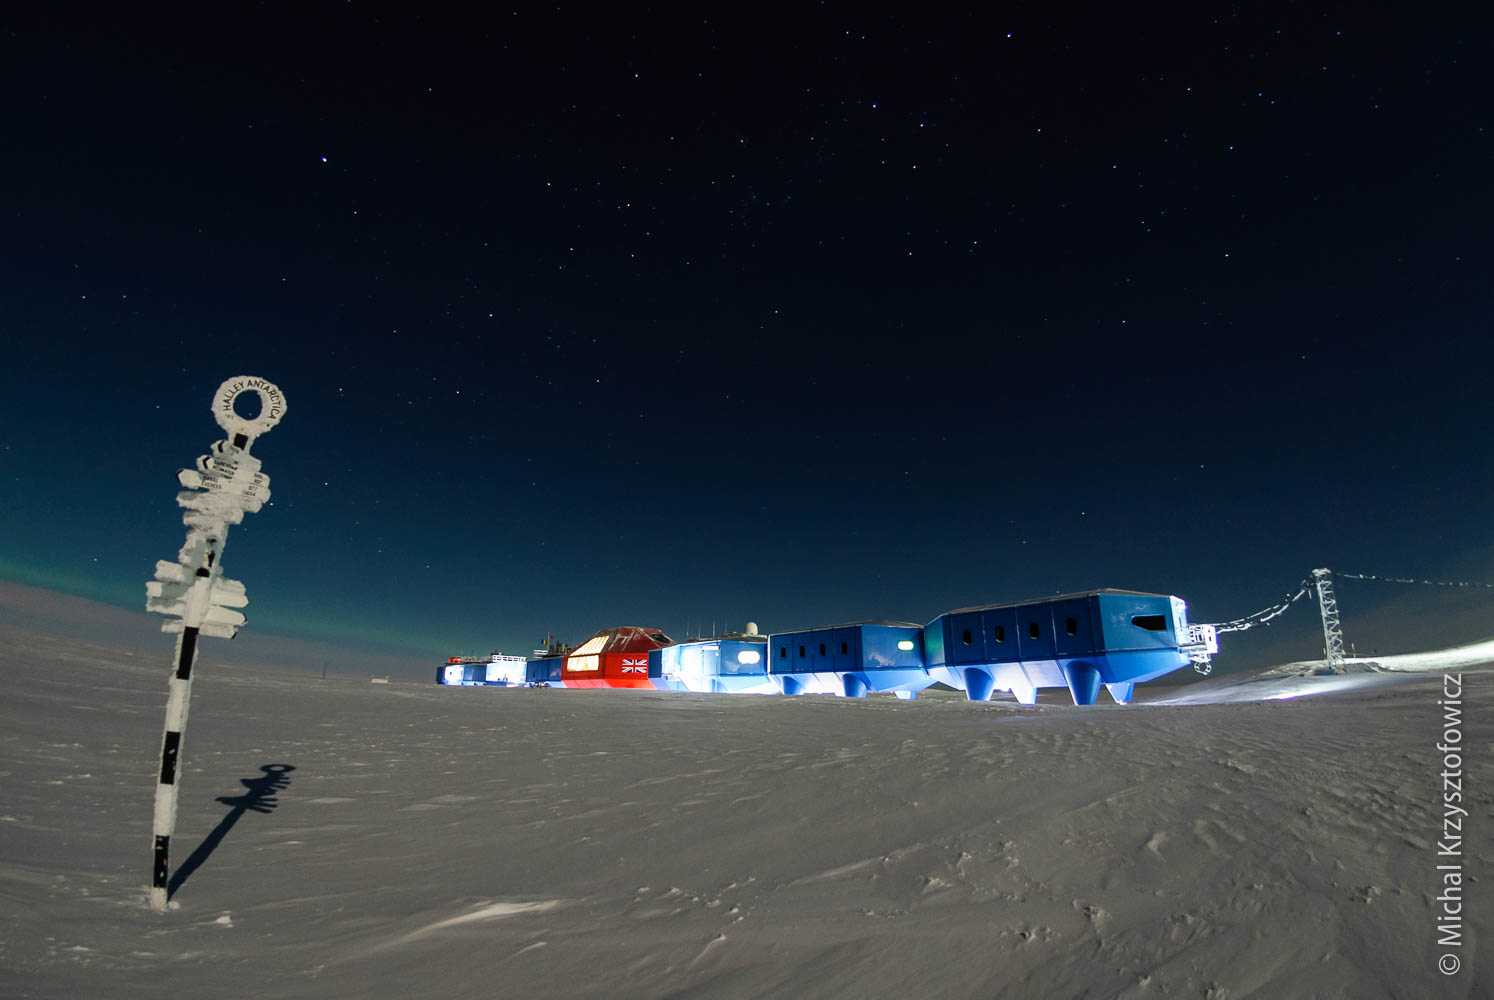 Halley VI Station in the Full Moon's light